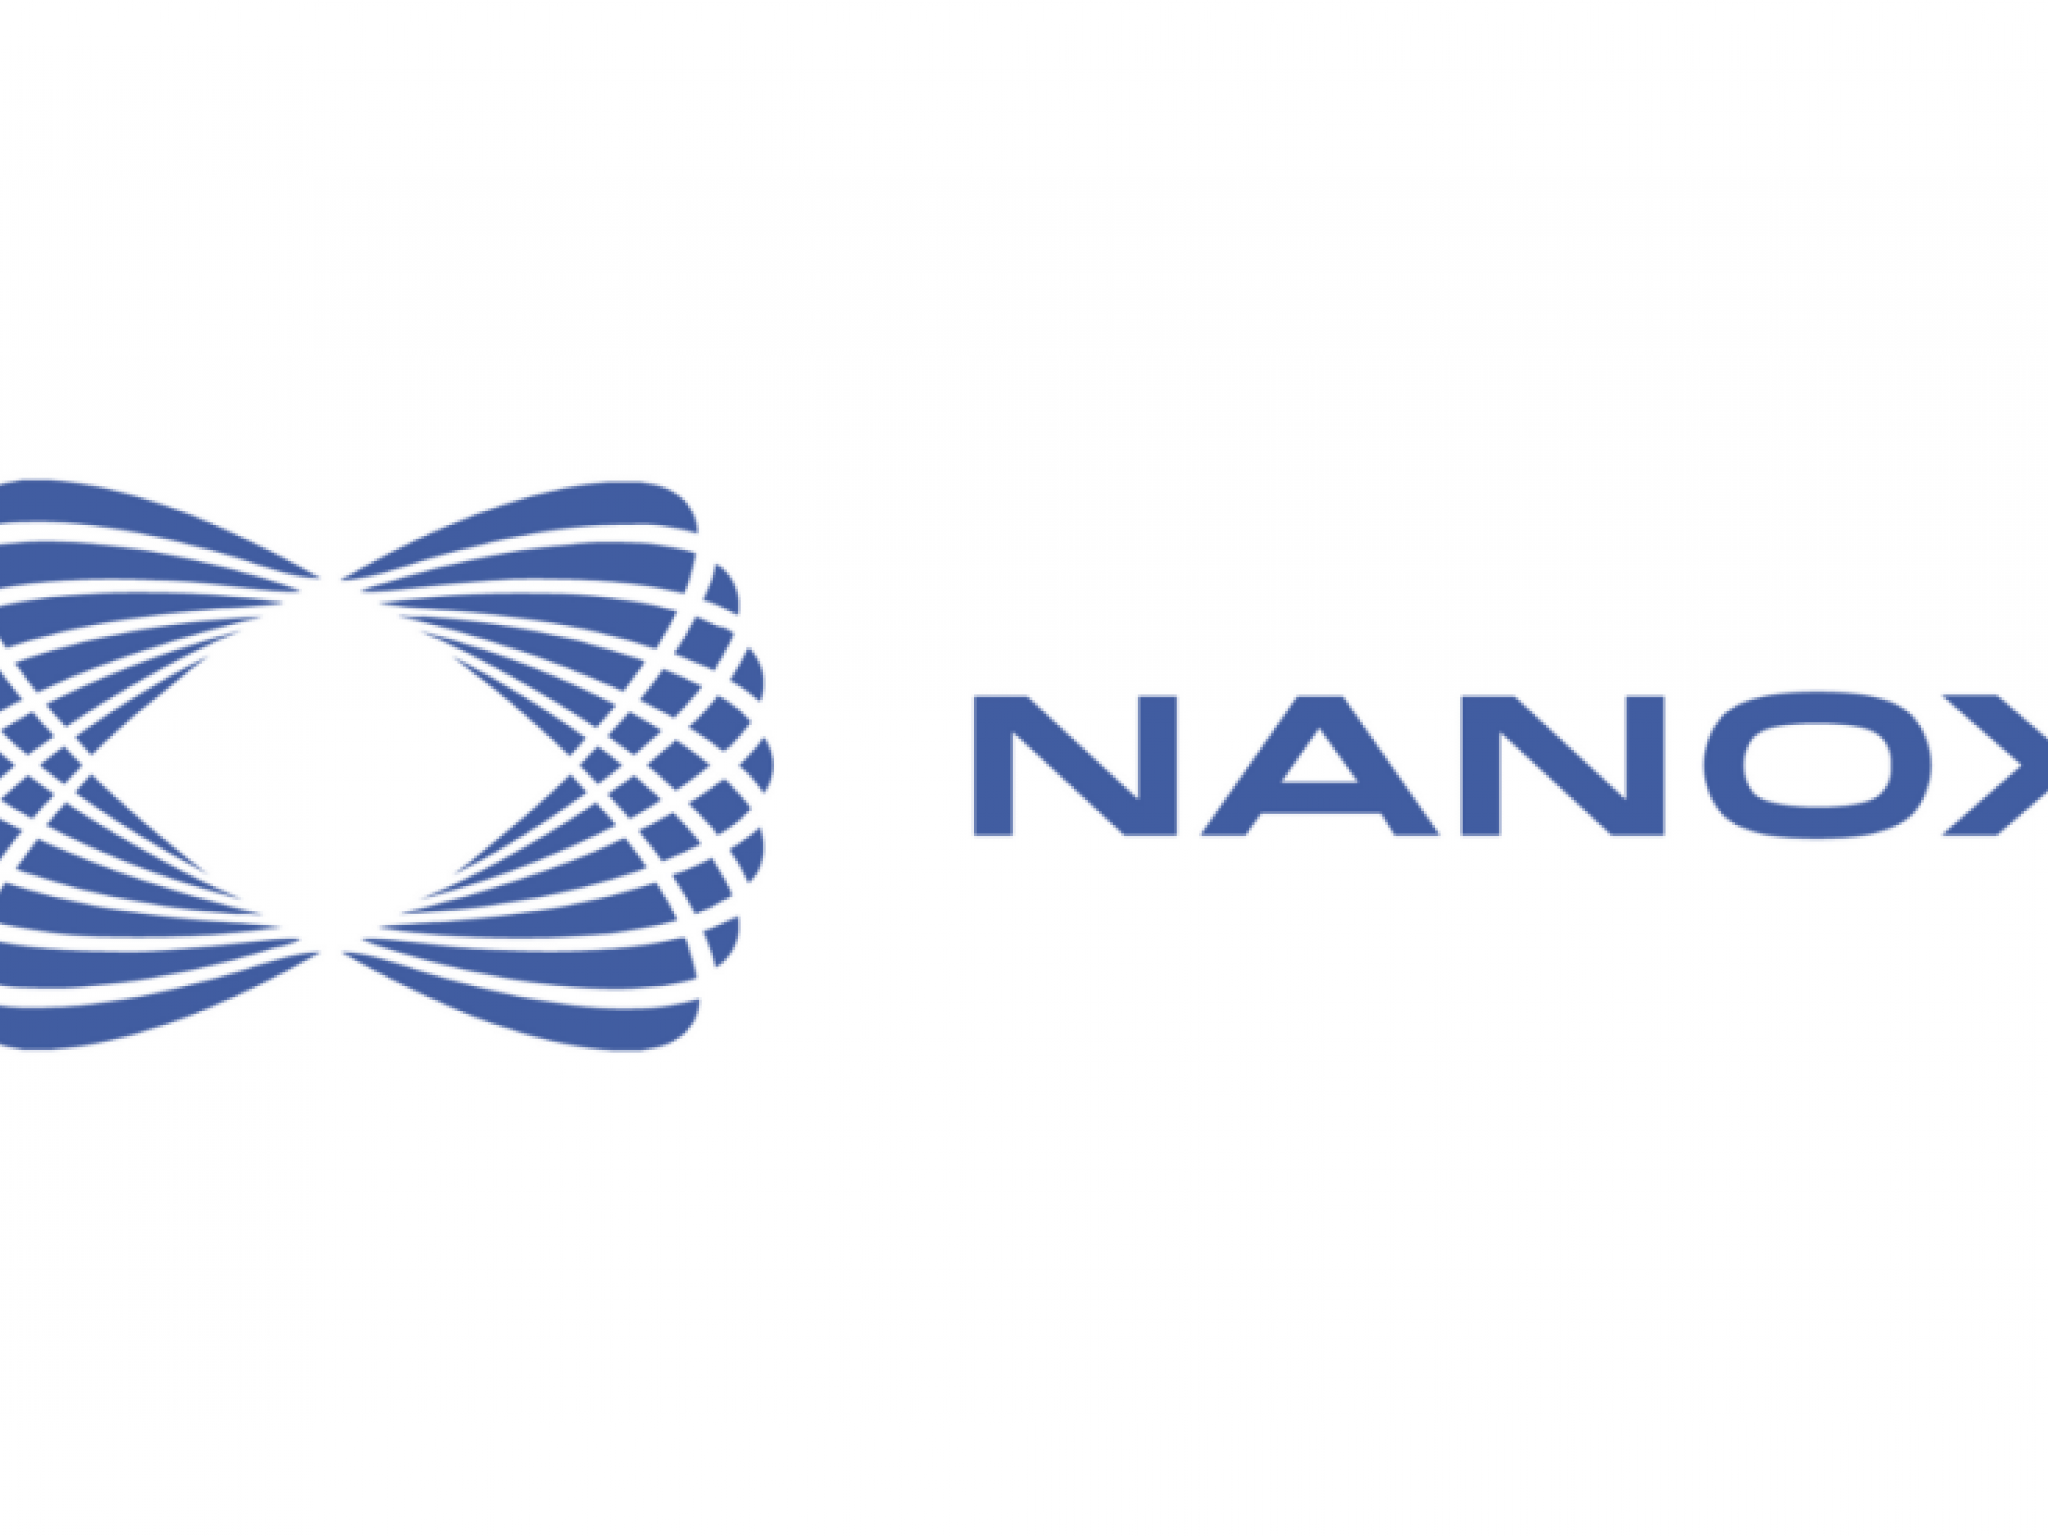  whats-going-with-nano-x-imaging-stock-on-thursday 